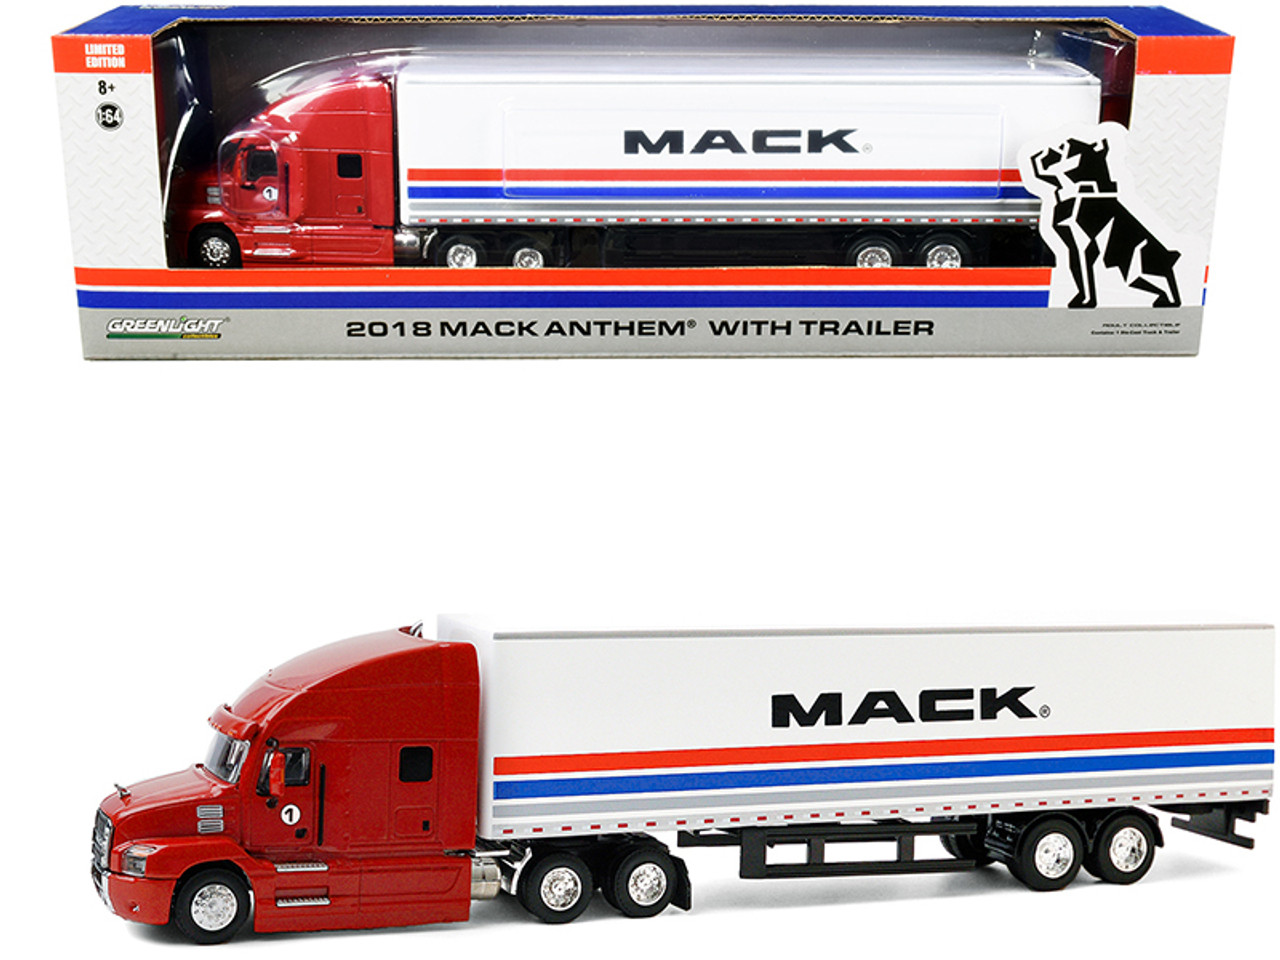 2018 Mack Anthem 18 Wheeler Tractor-Trailer "#1 The Mack Performance Tour 2018" Red and White with Stripes 1/64 Diecast Model by Greenlight